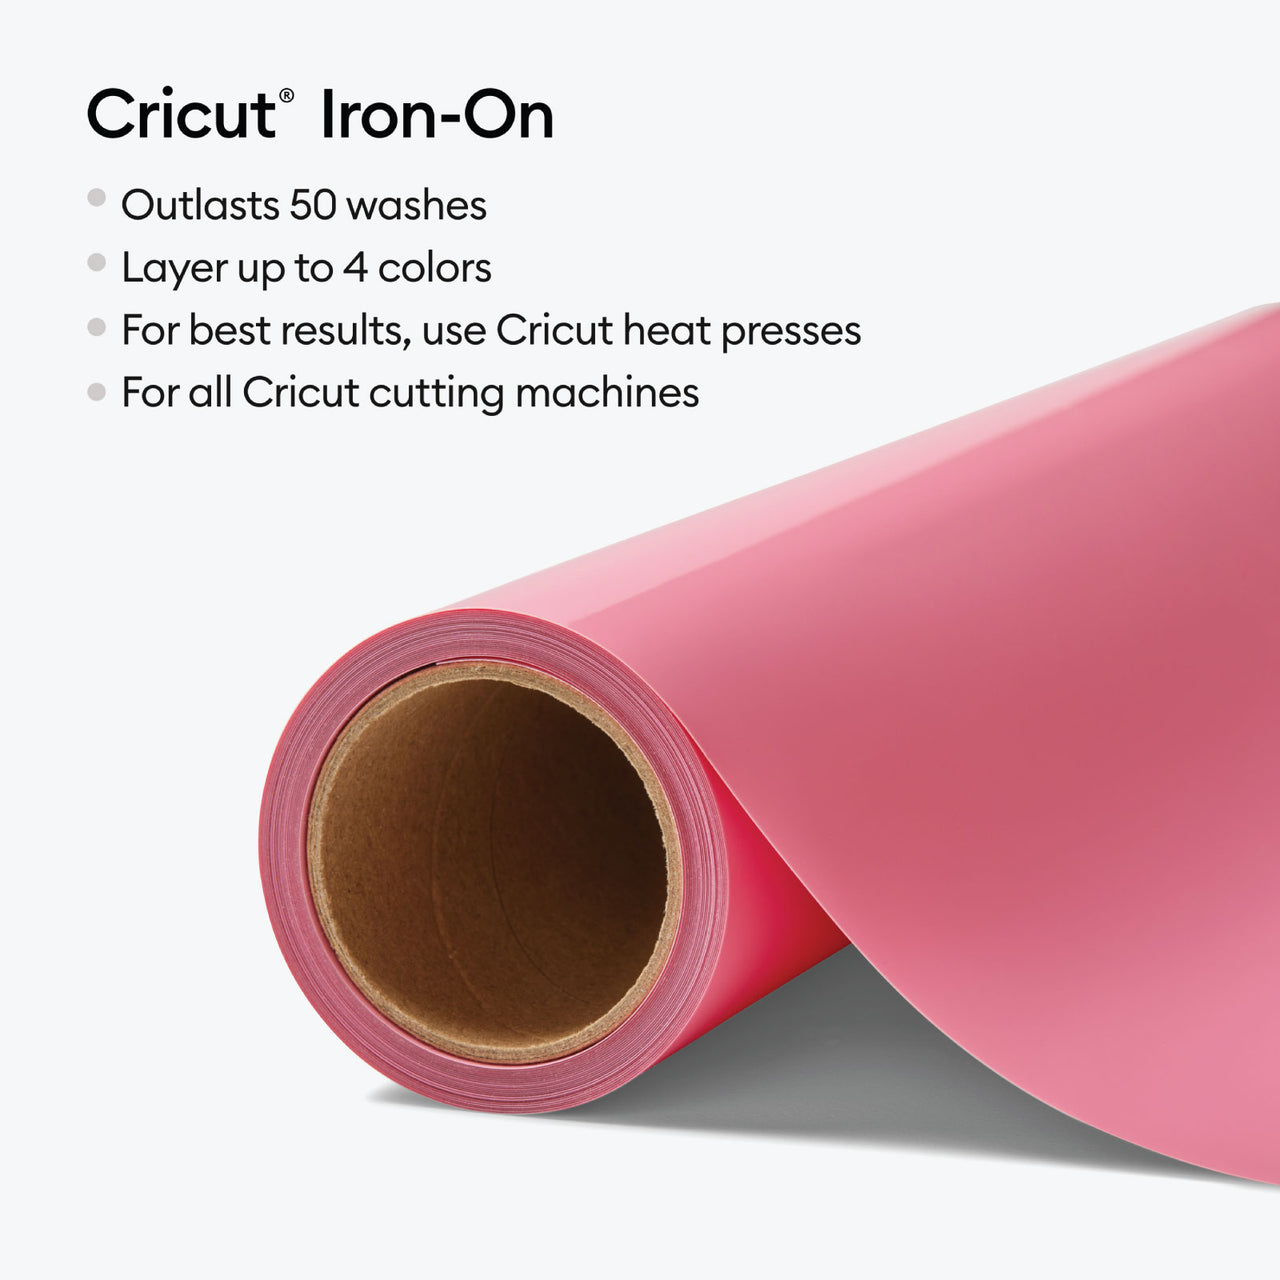 Cricut Iron-On 12 ft Pink - Damaged Package